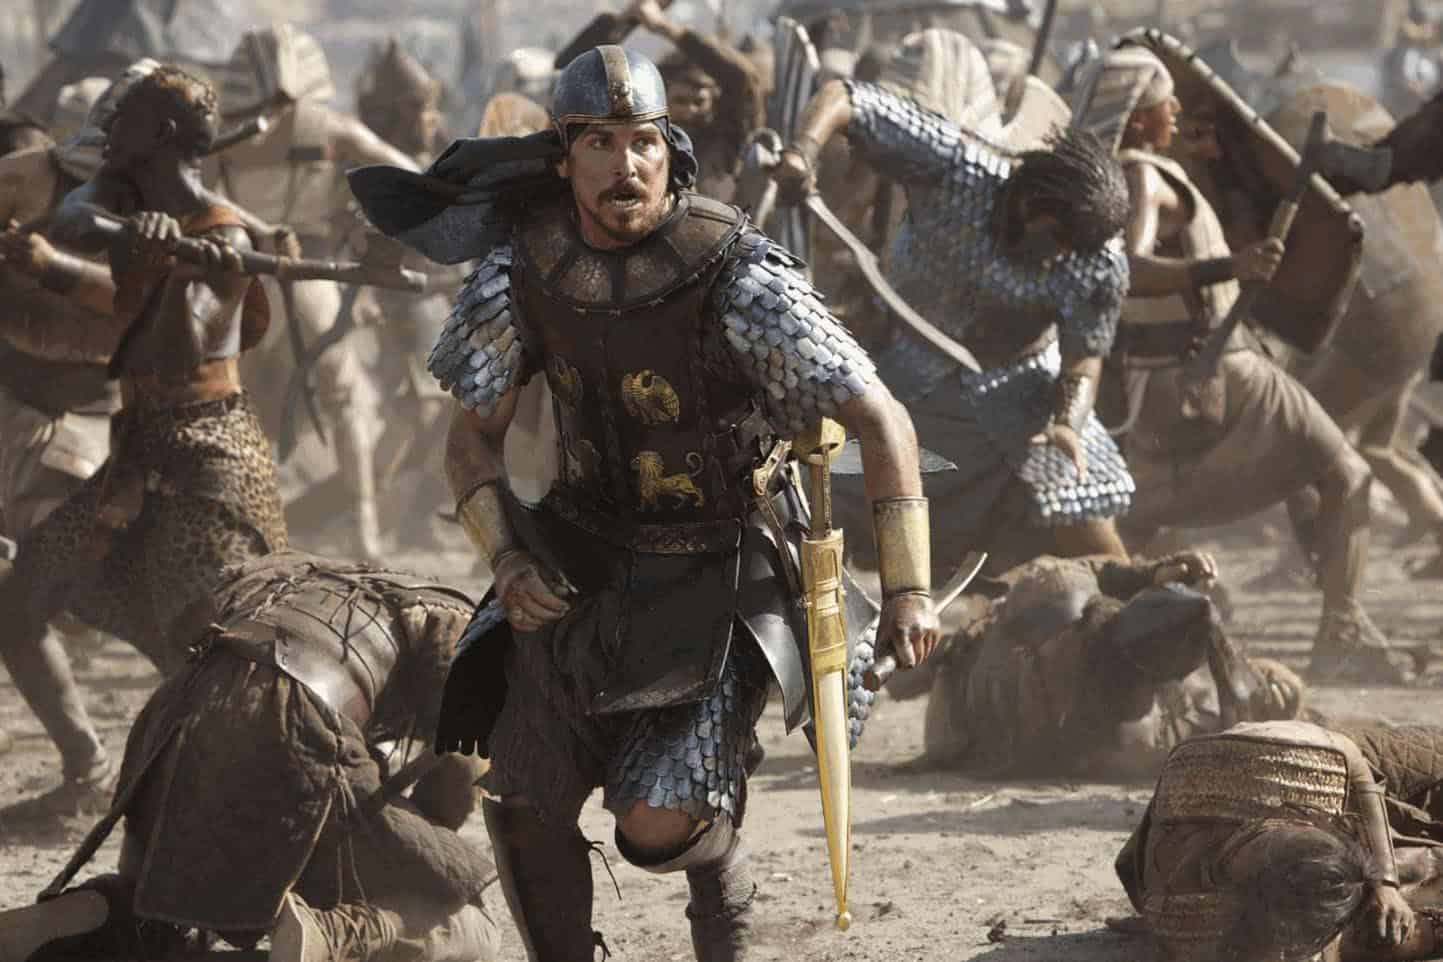 Best Historical Action Movies Like 300